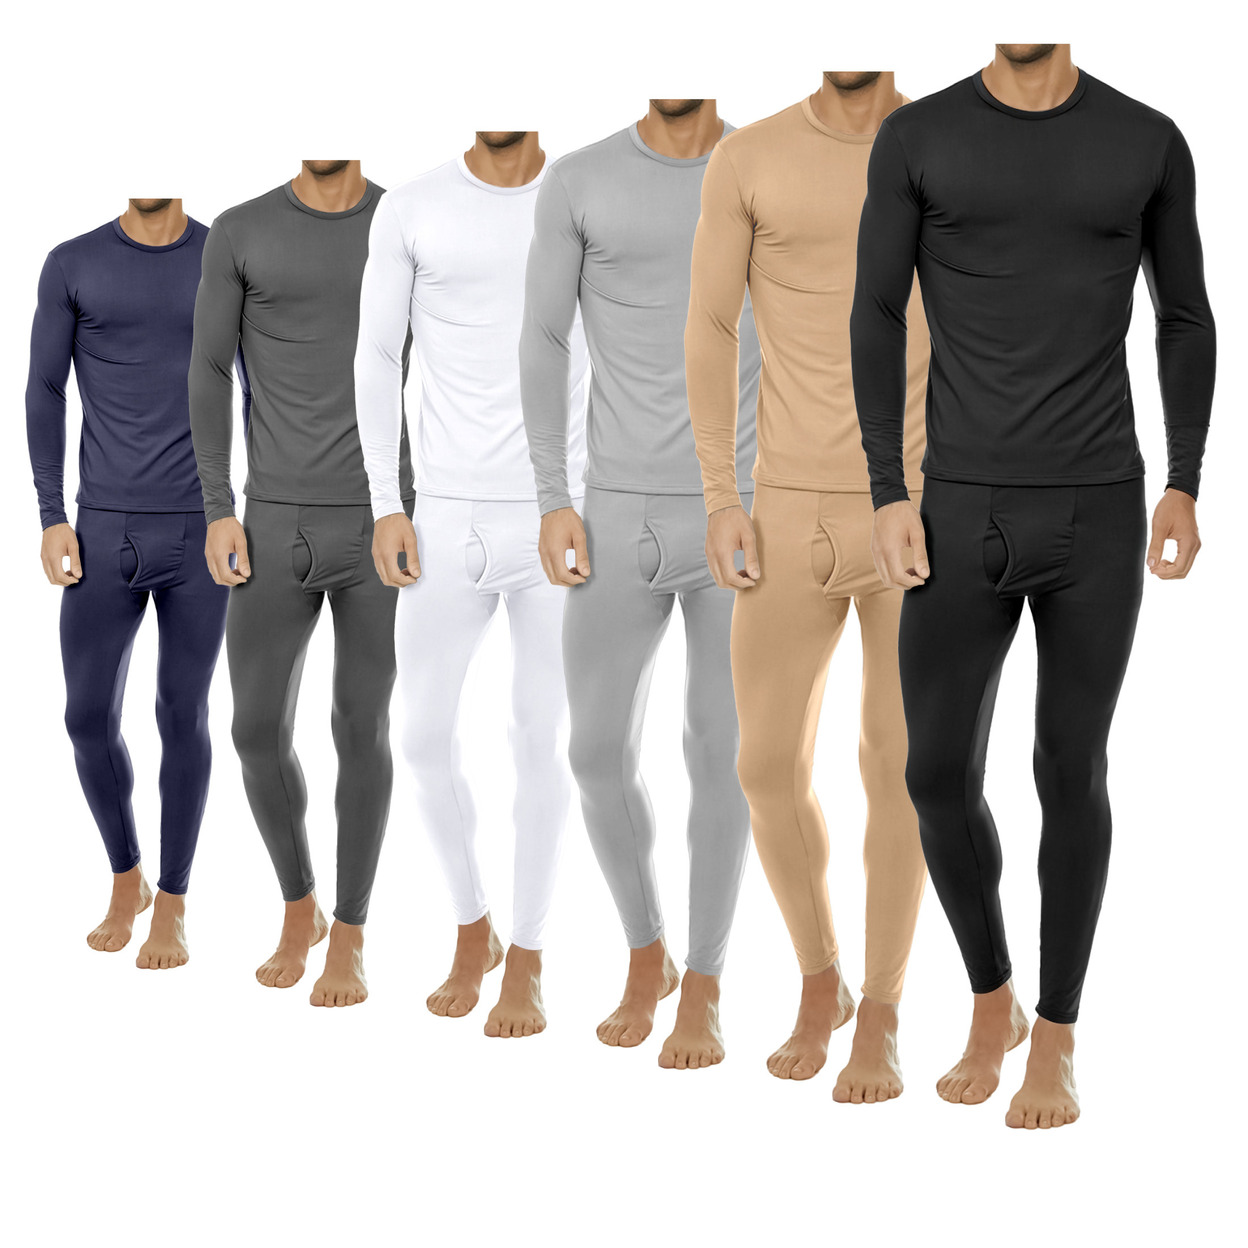 2-Sets: Men's Winter Warm Fleece Lined Thermal Underwear Set For Cold Weather - Black&grey, Small